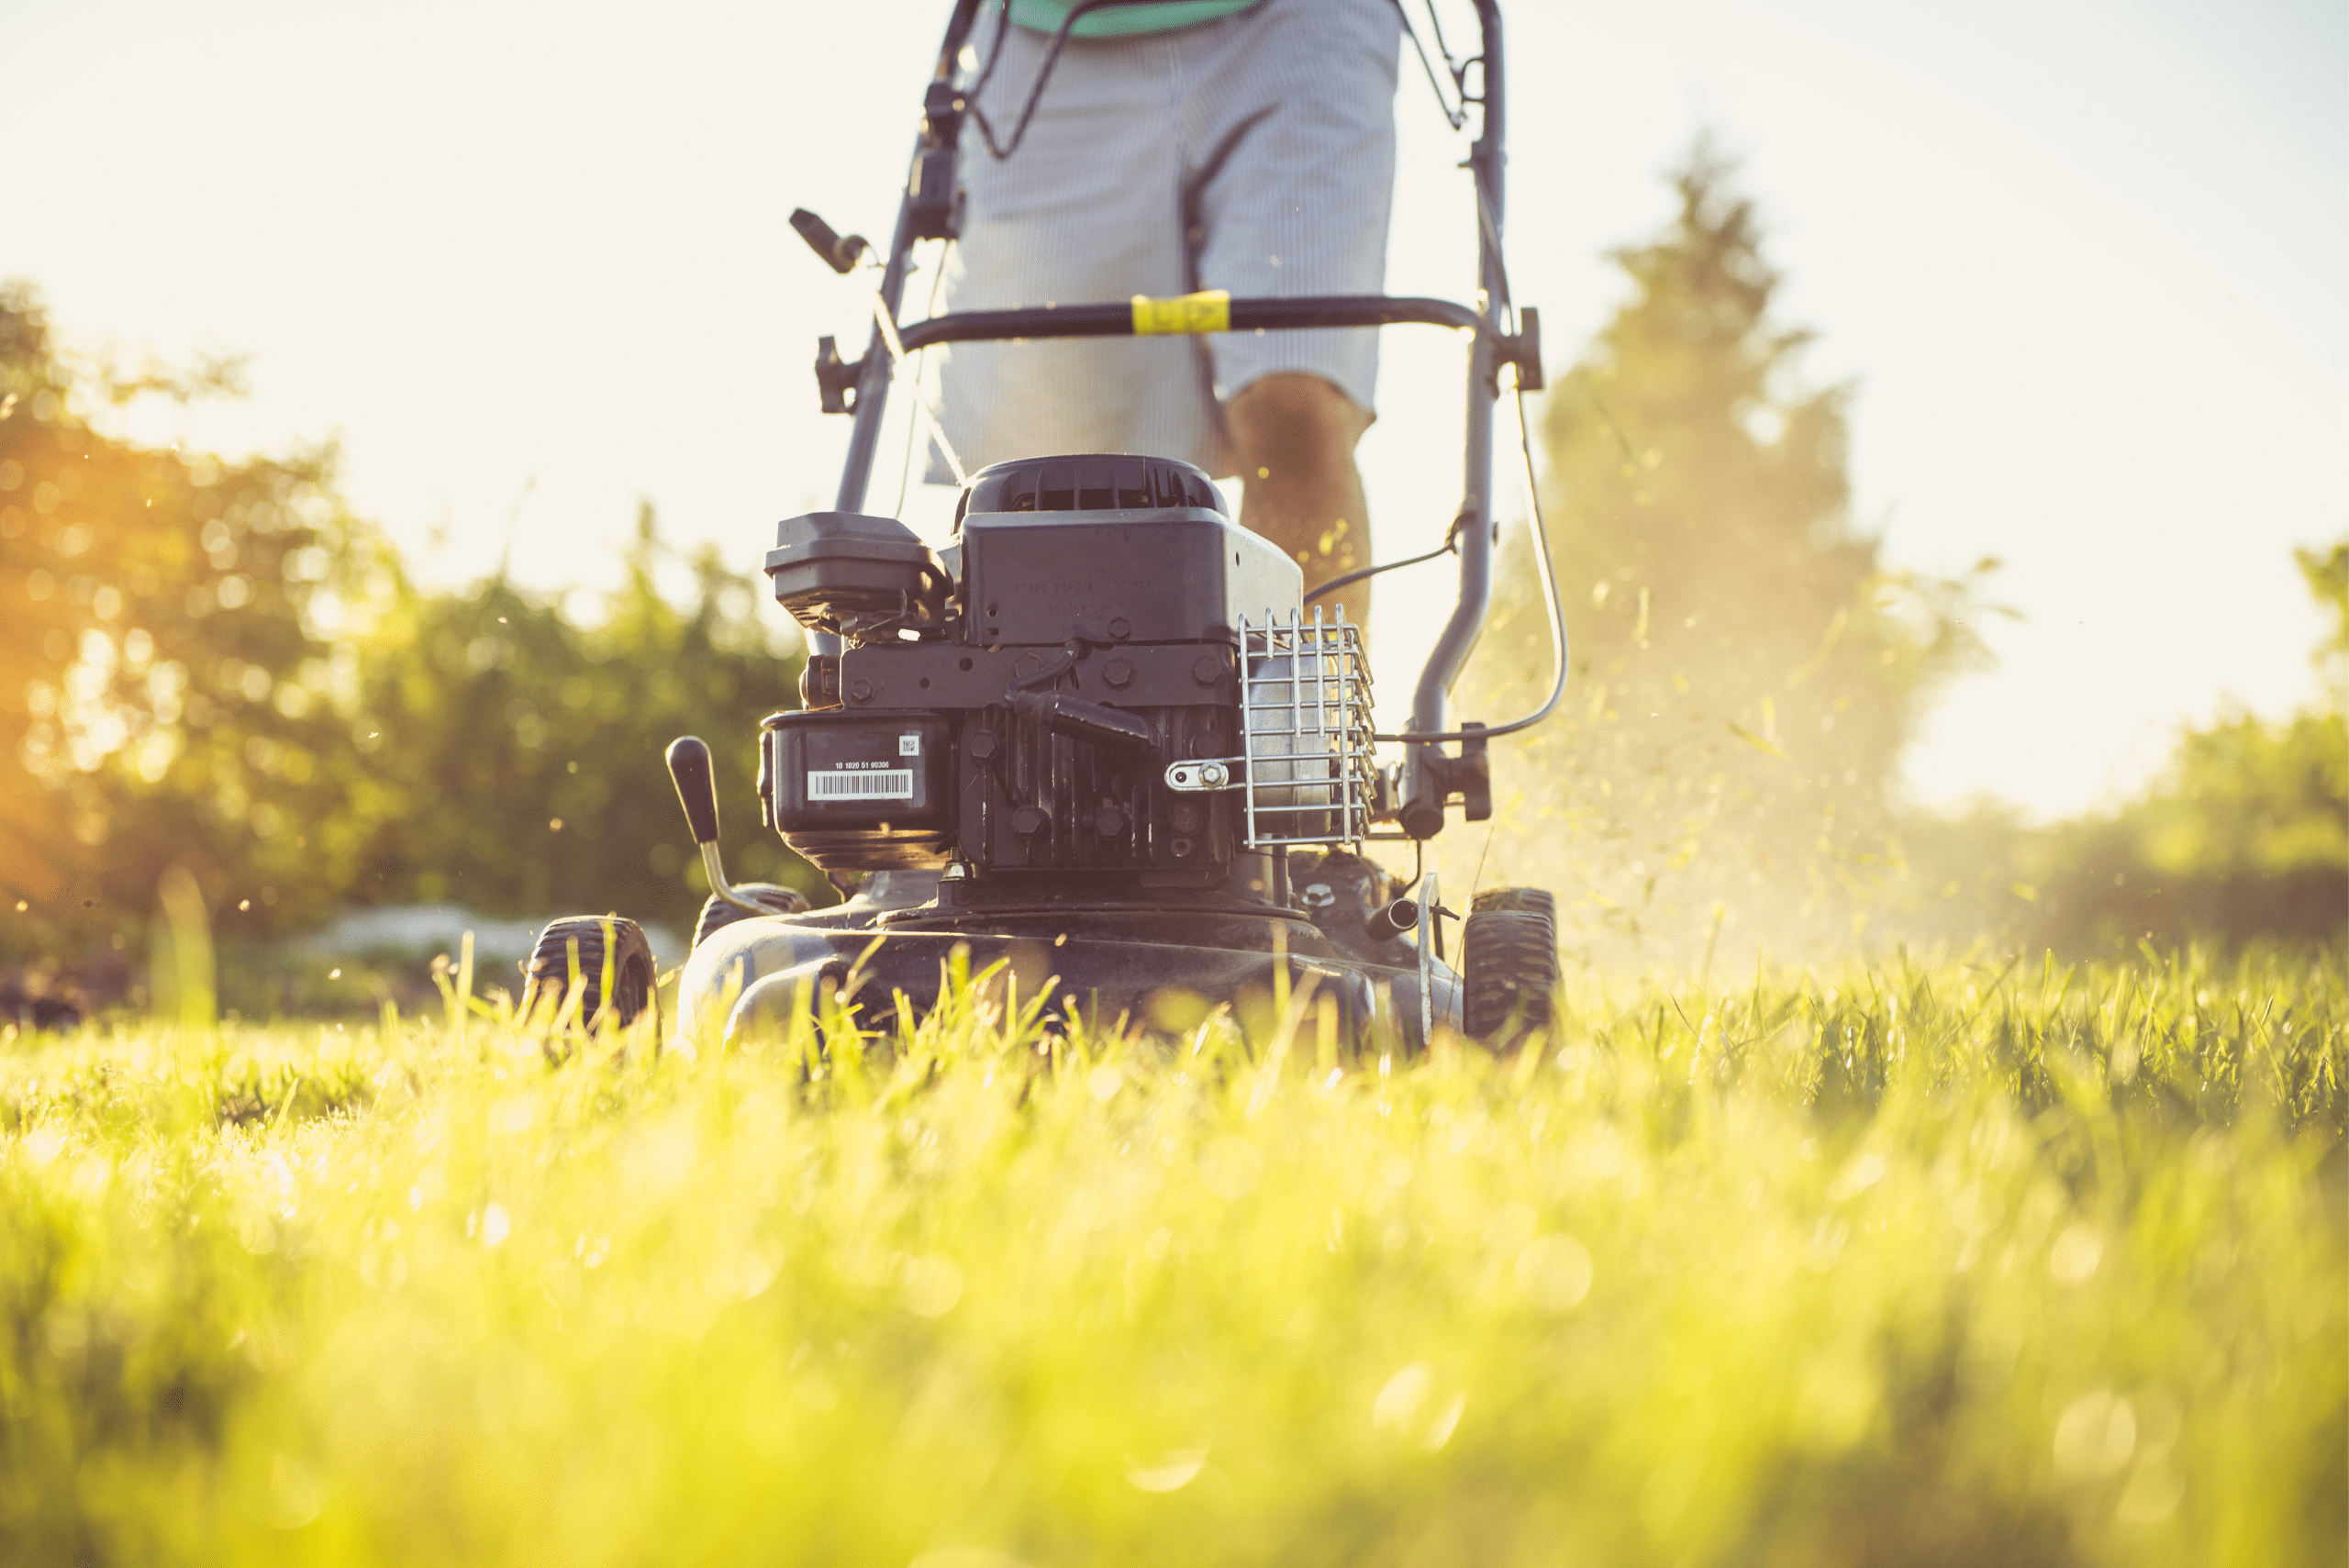 A person pushing a lawn mower on grass.